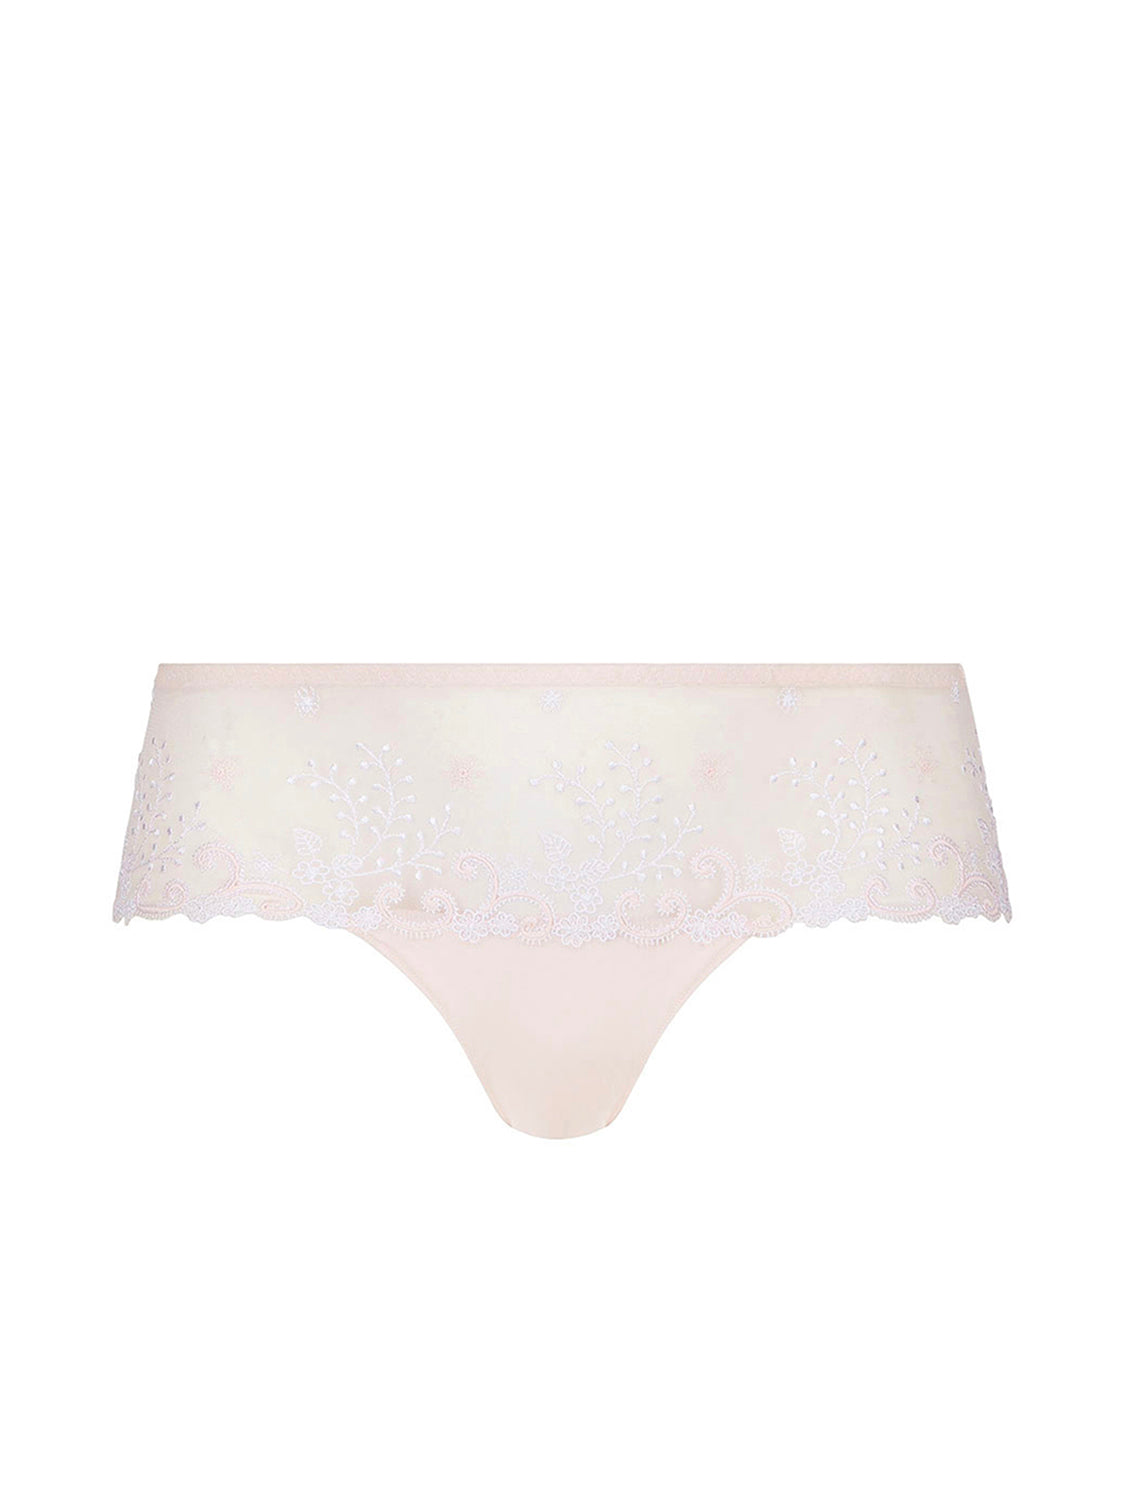 12x319 Delice Sheer Plunge - Pretty Moments Lingerie